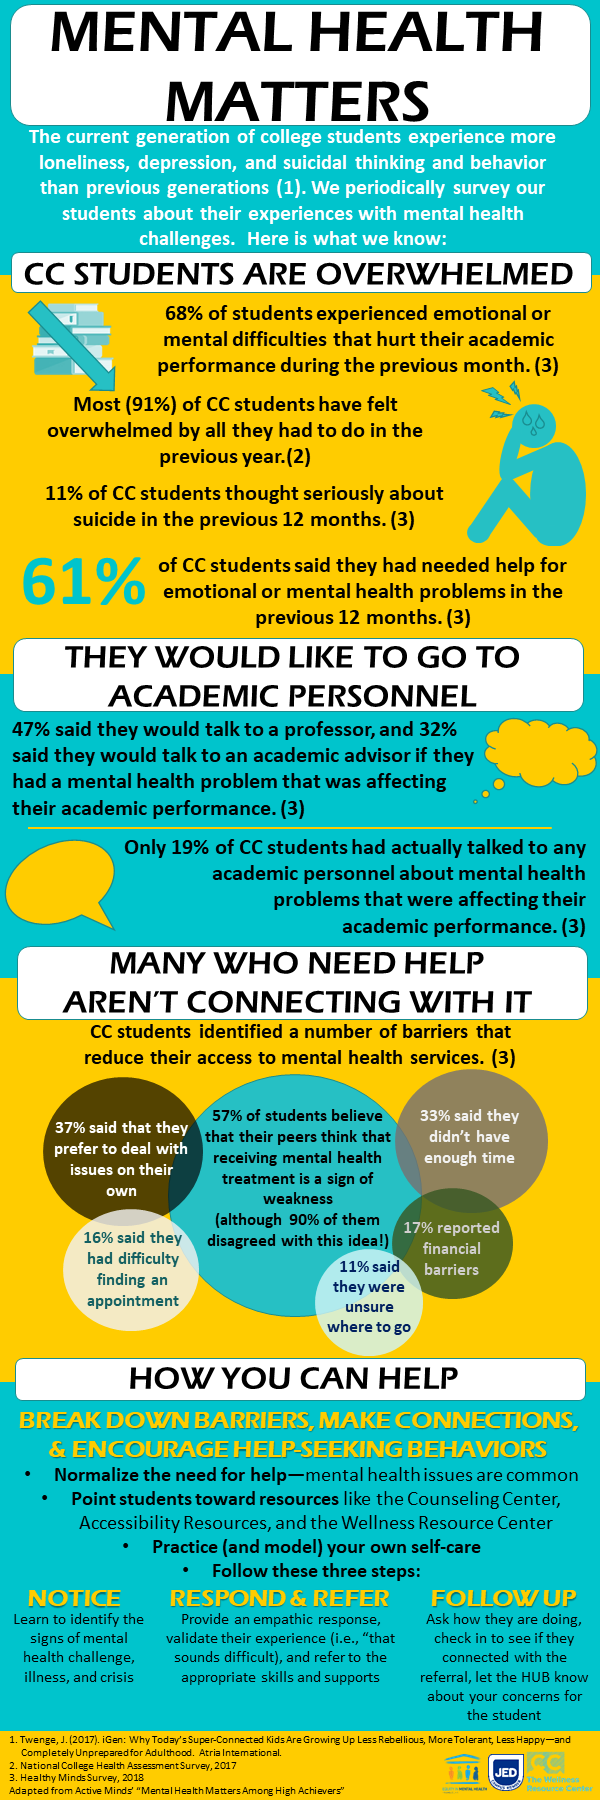 Mental Health Matters Infographic